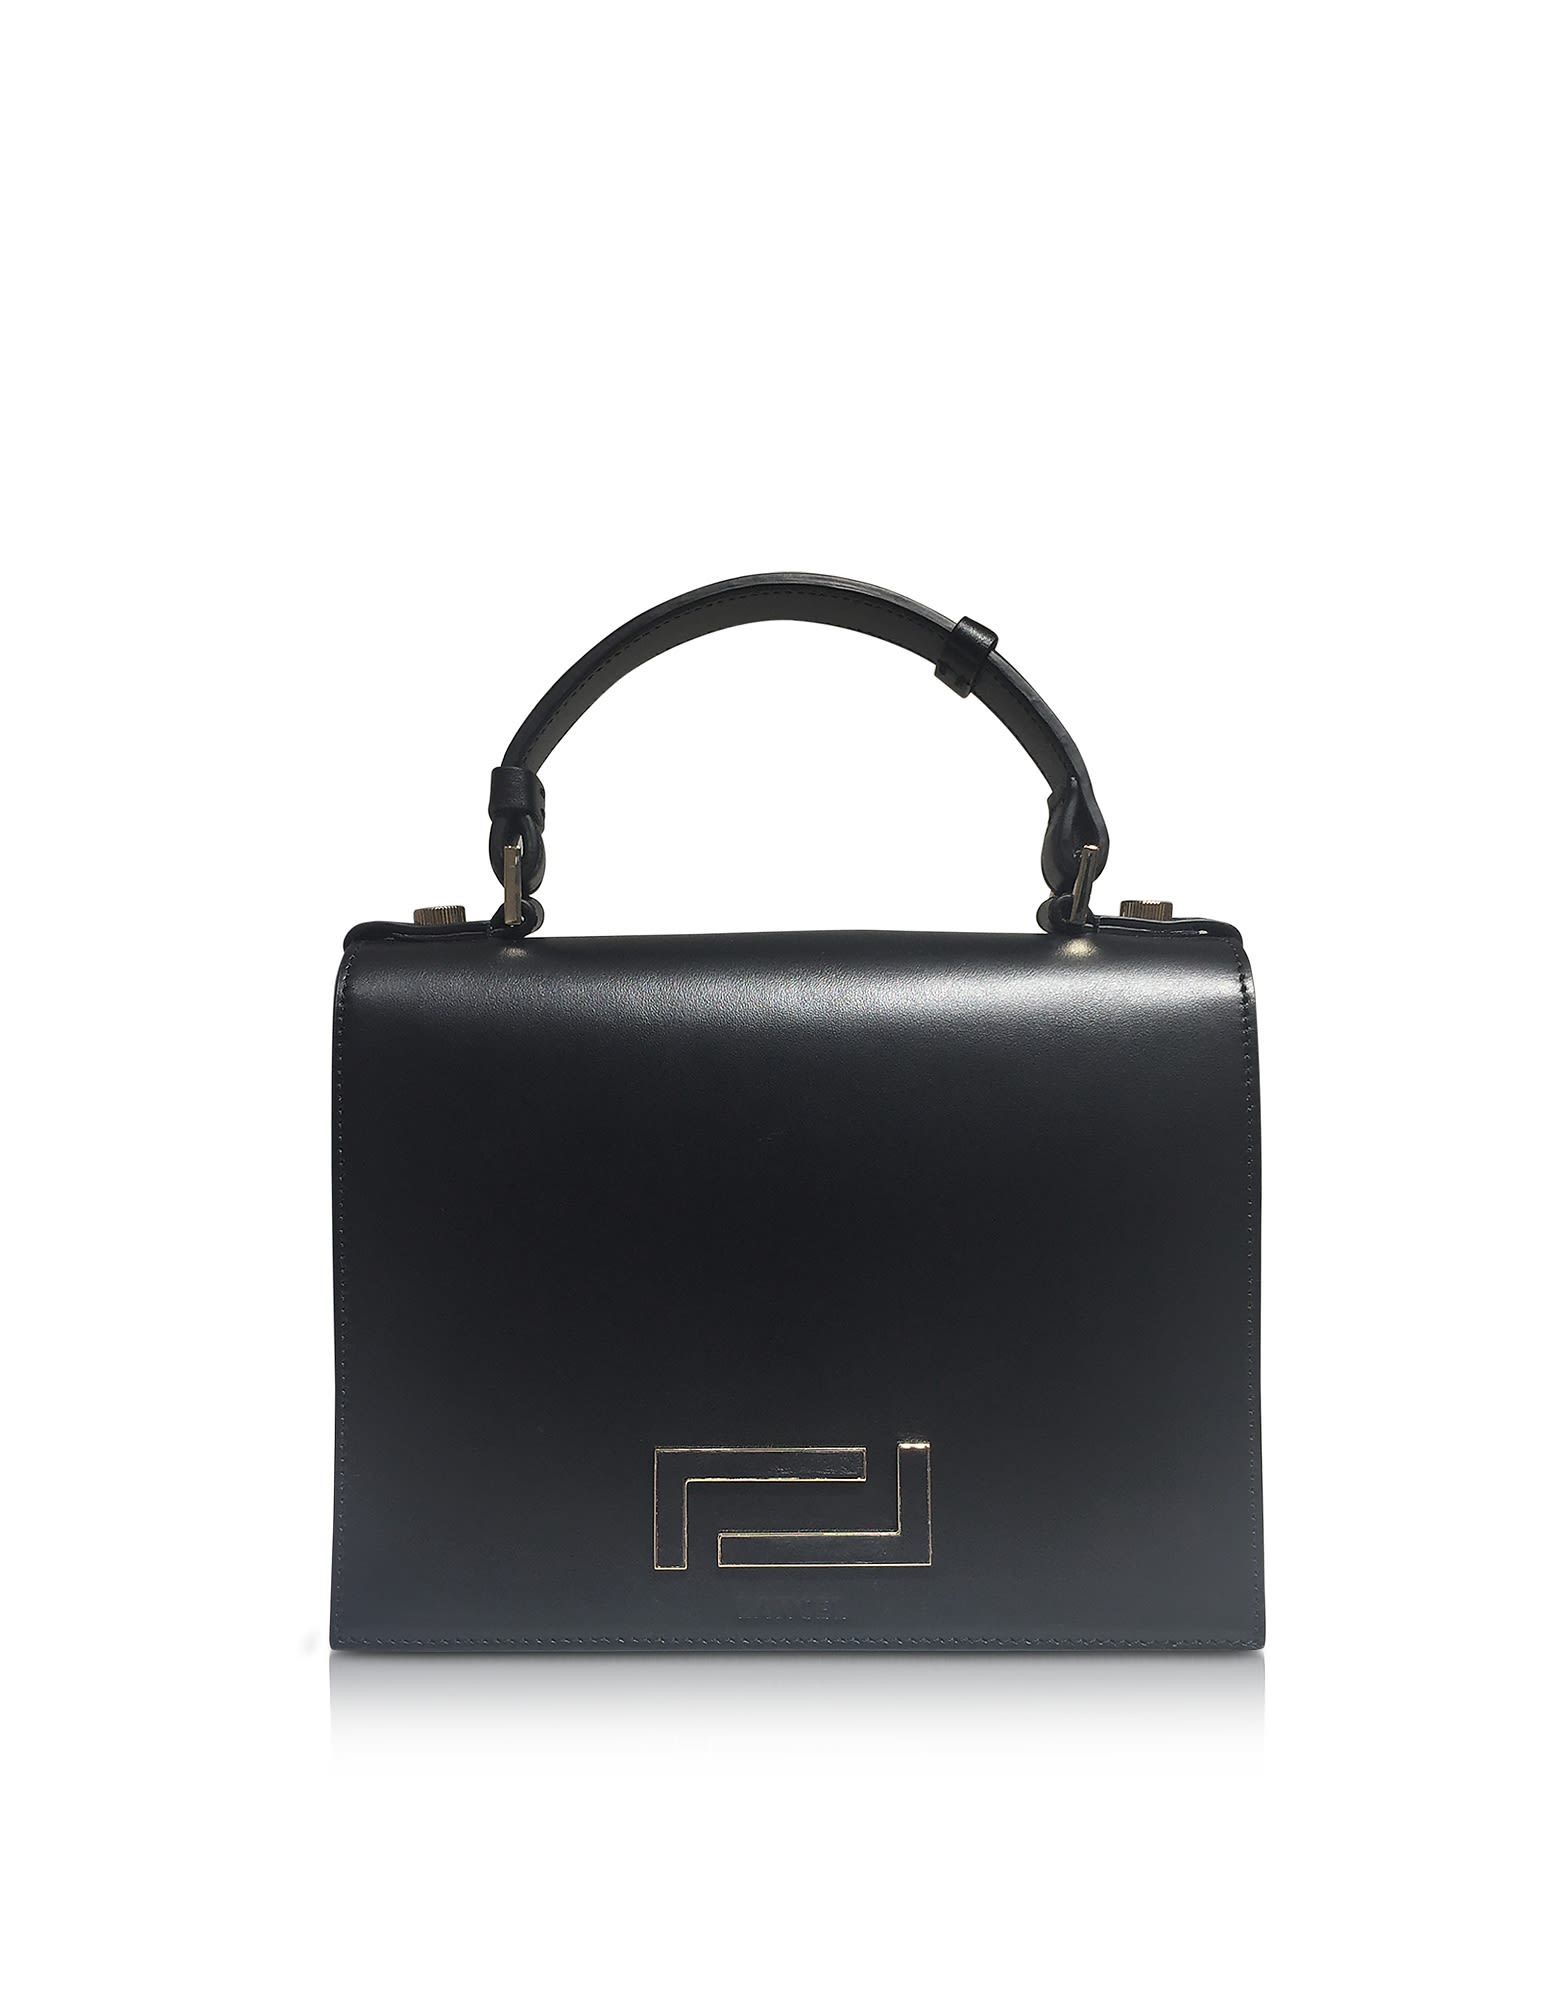 Lancel PIA BLACK SMOOTH LEATHER AND SUEDE SATCHEL BAG